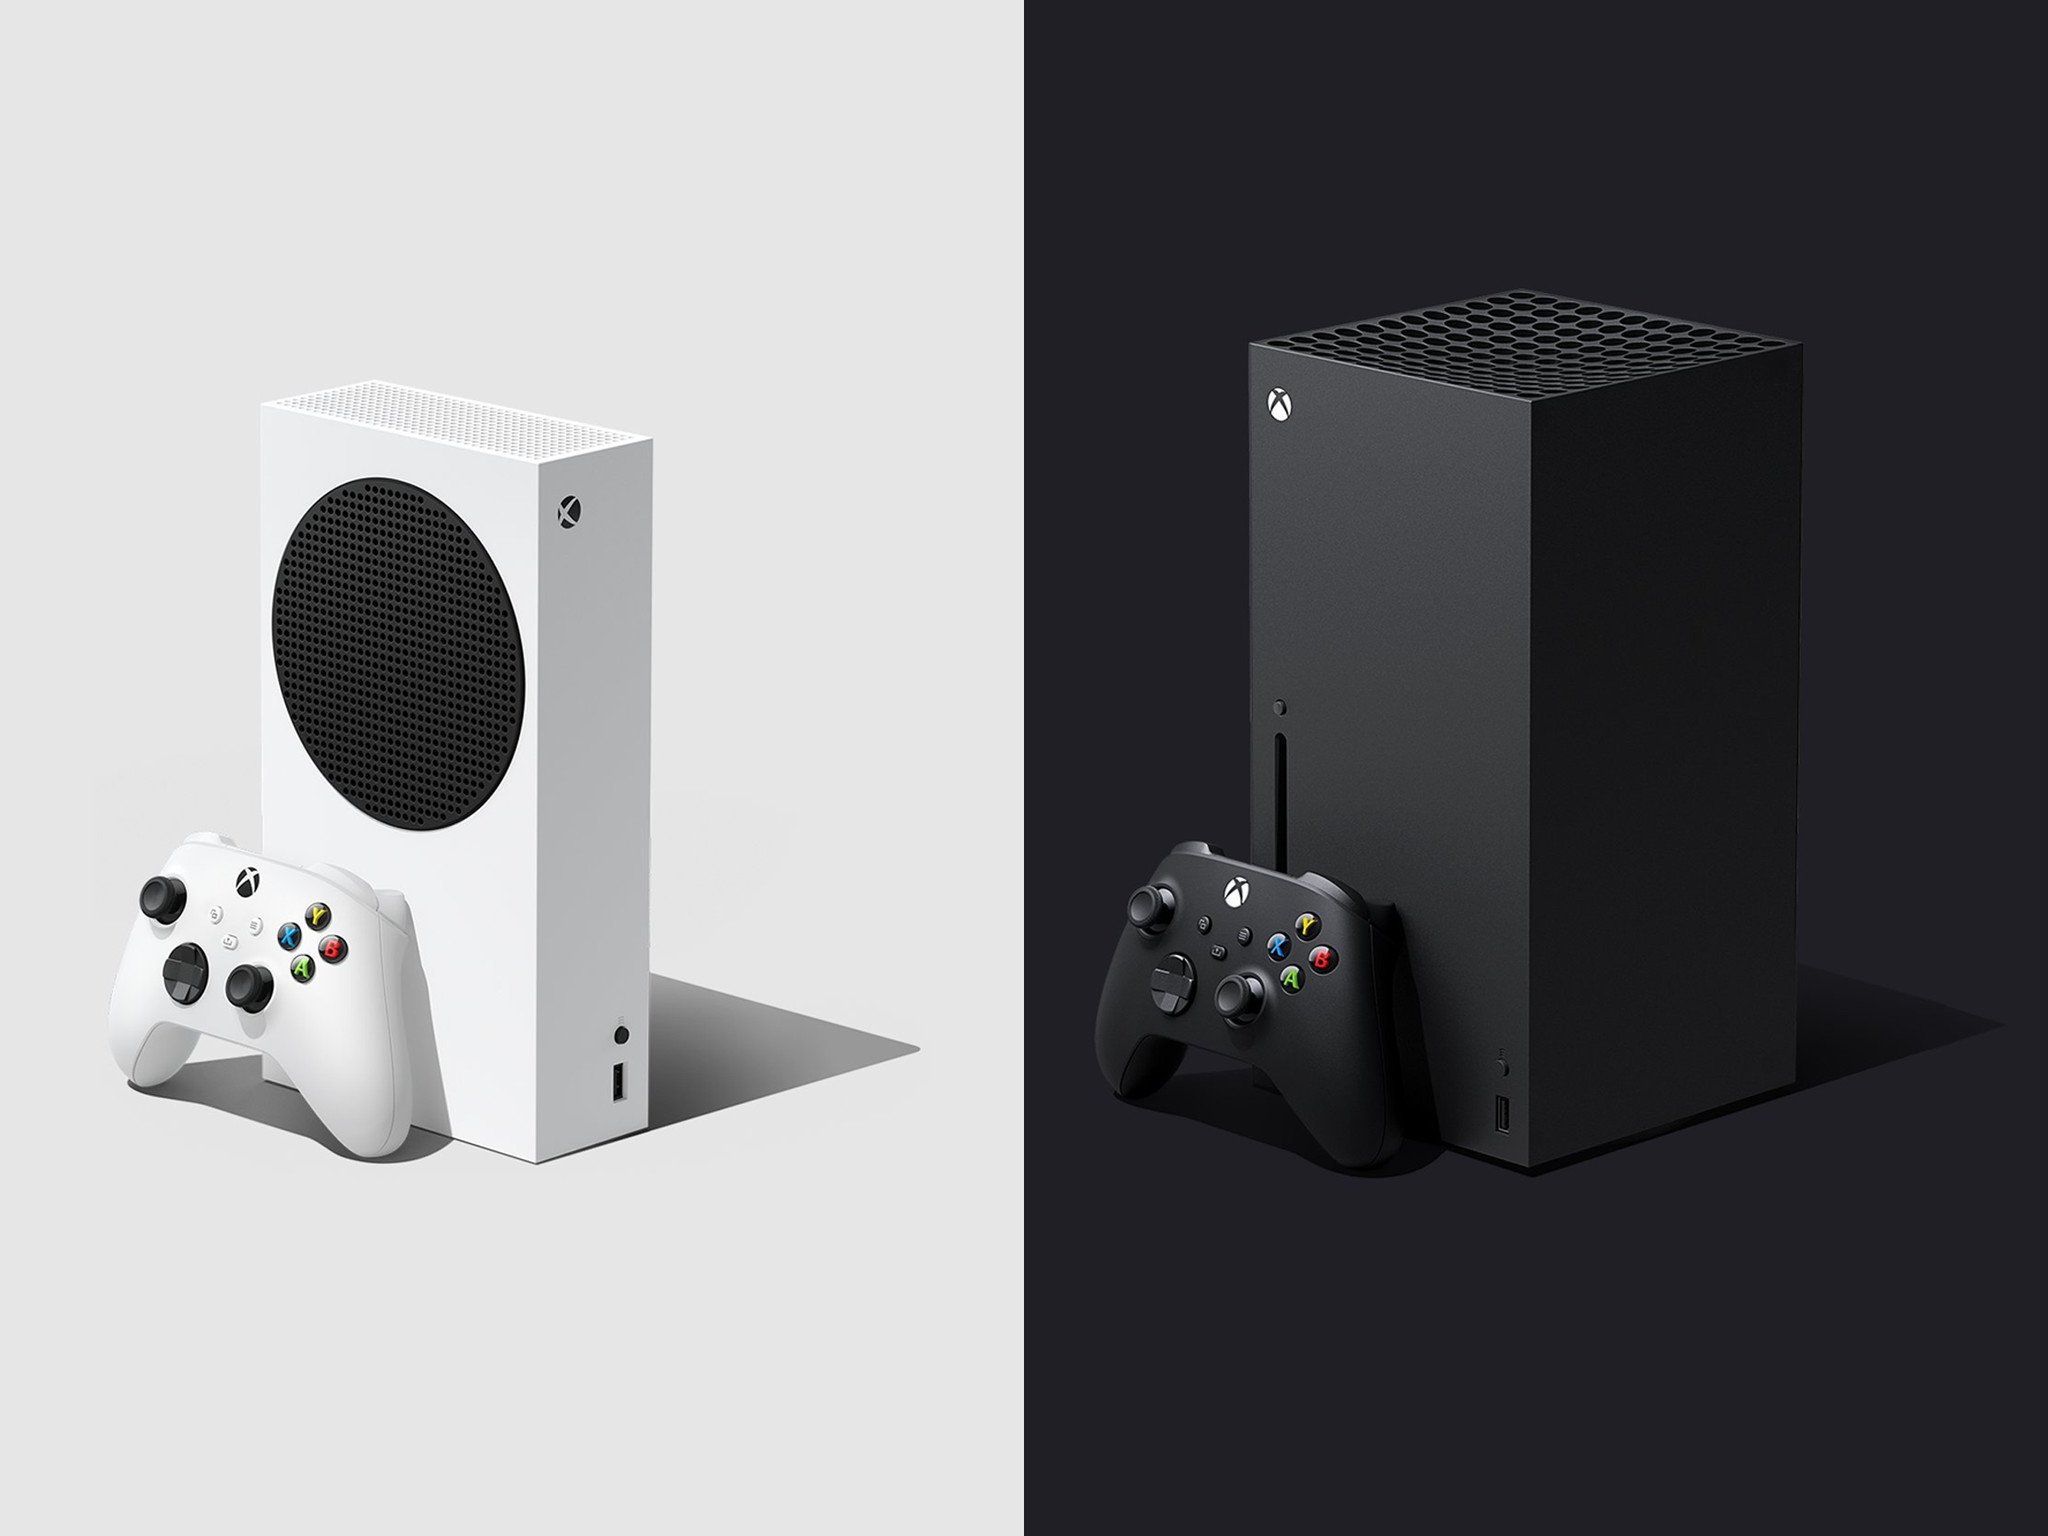 Here's our first look at Microsoft's flagship console, Xbox Series